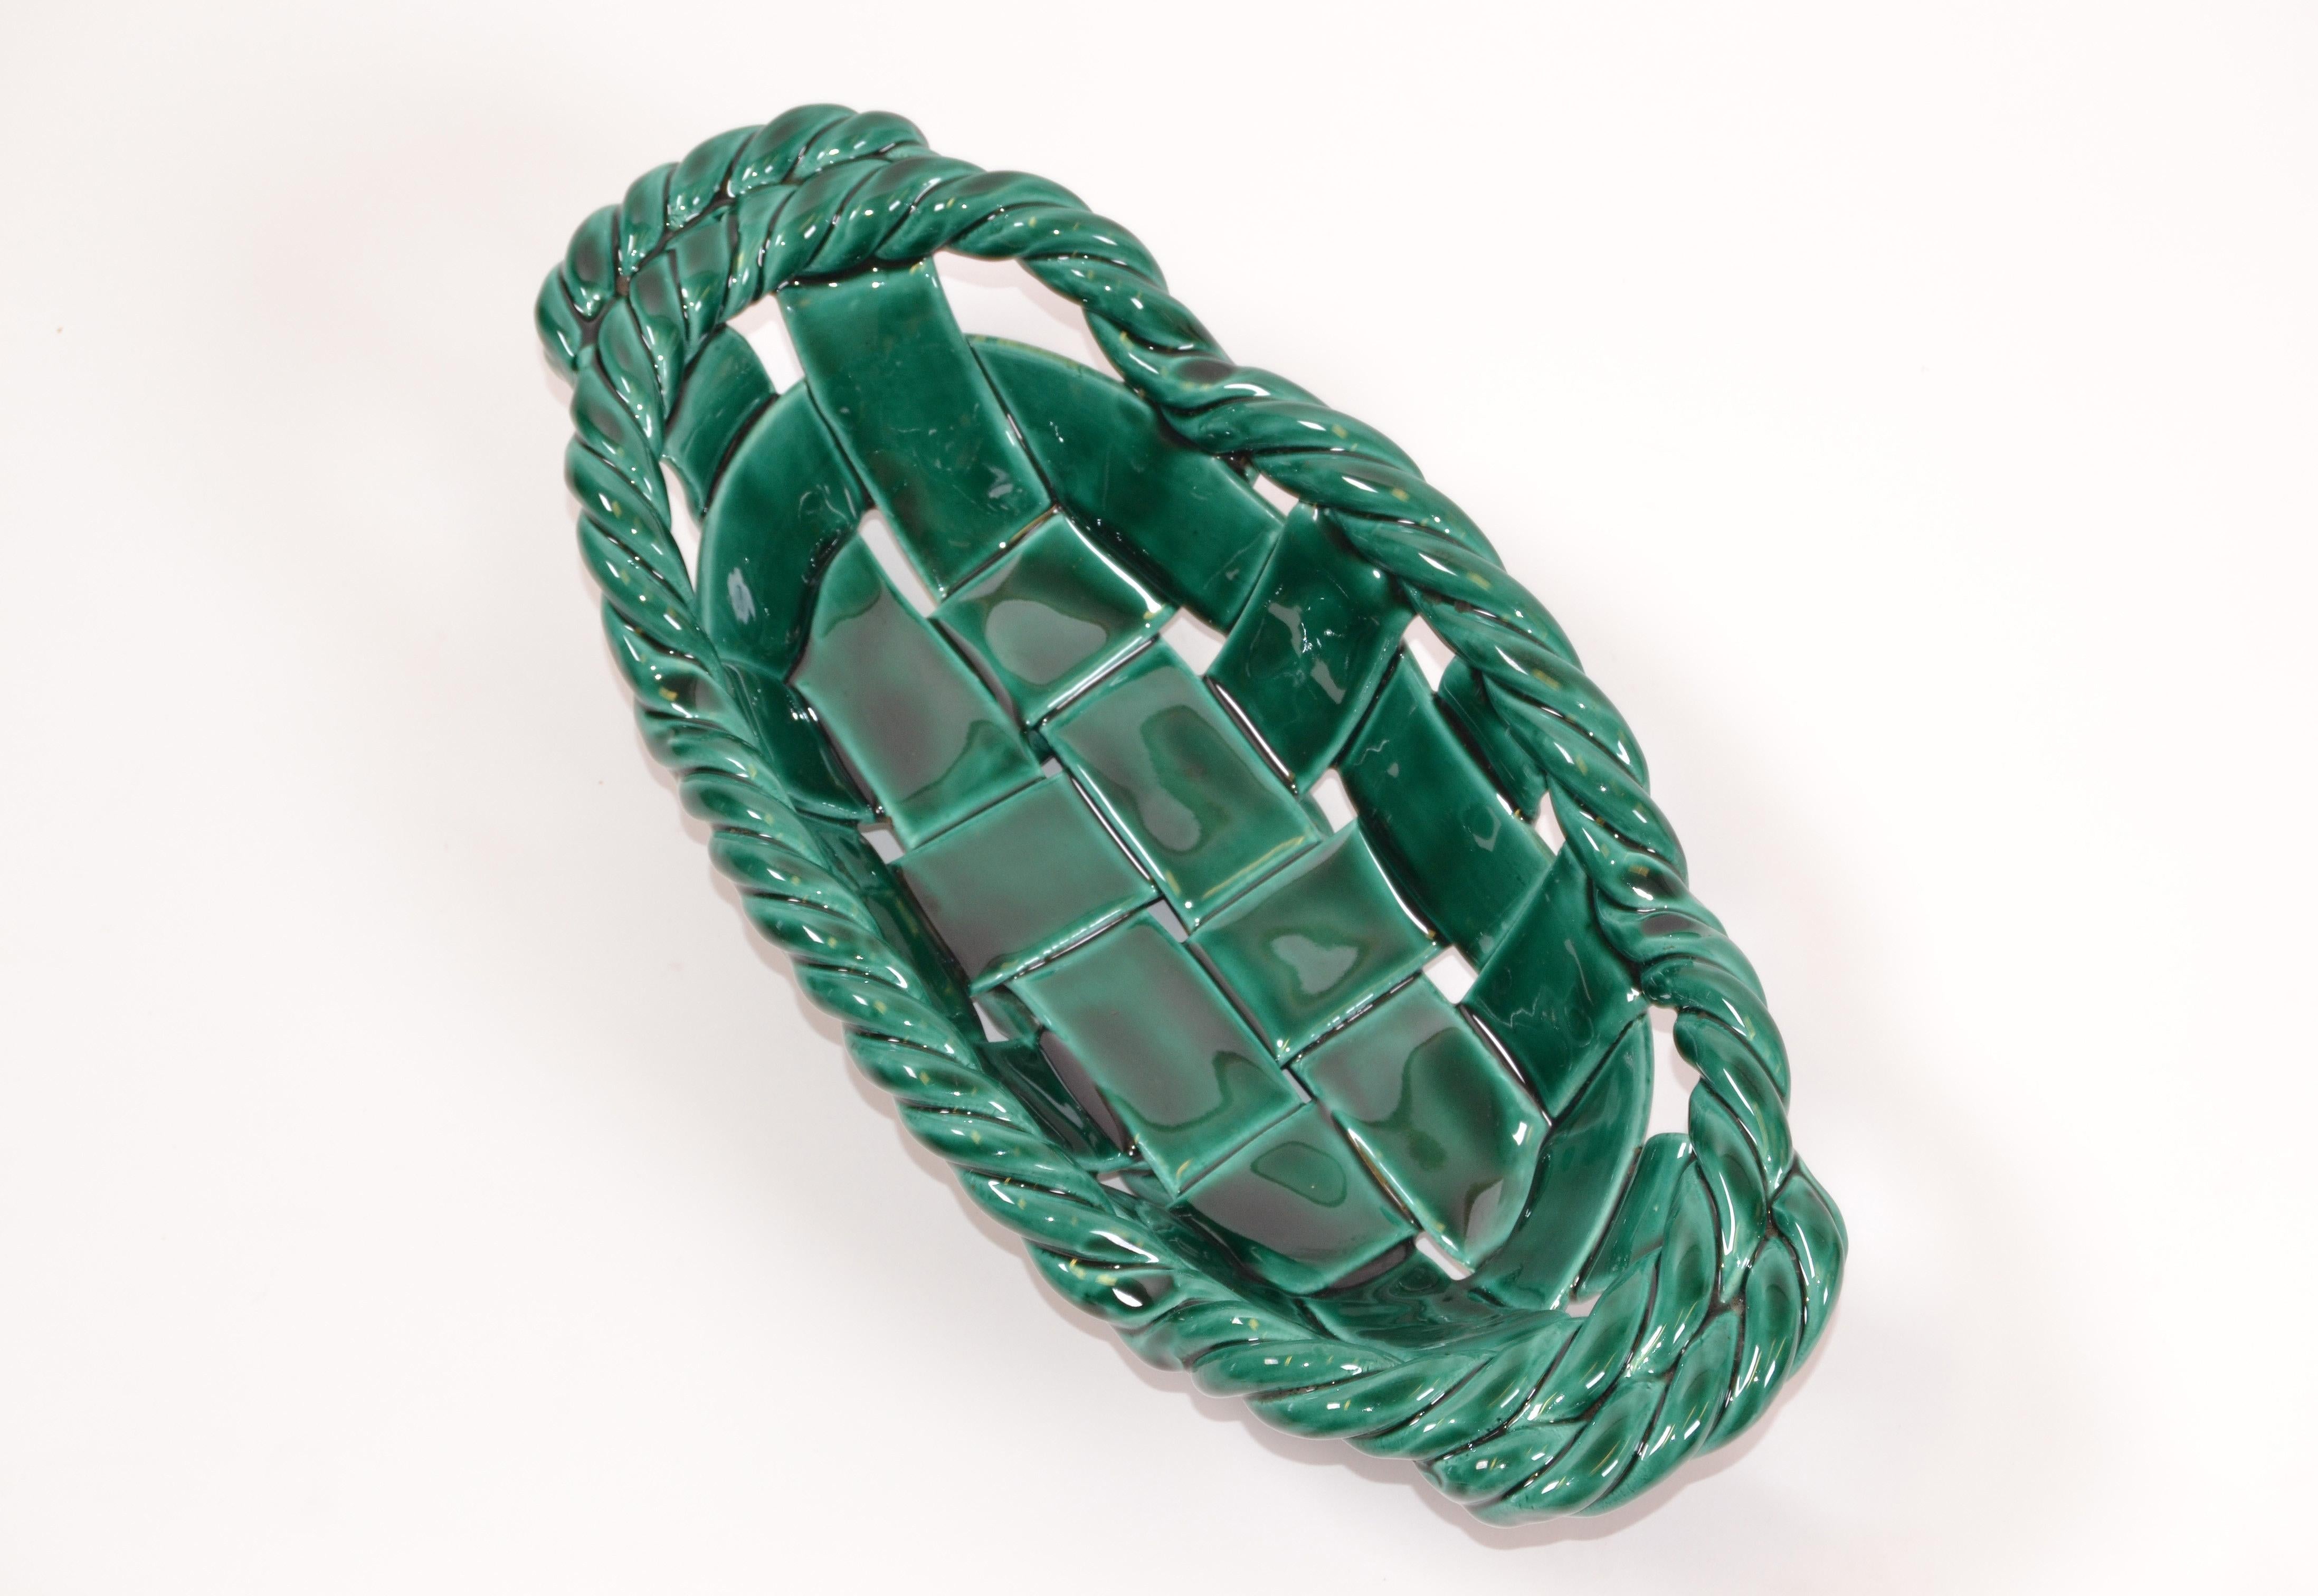 Mid-Century Modern Woven Ceramic, Pottery in Emerald Green from Vallauris (small village on the French Riviera).
Marked at the Base and dated A-62.
Beautiful as well as practical.